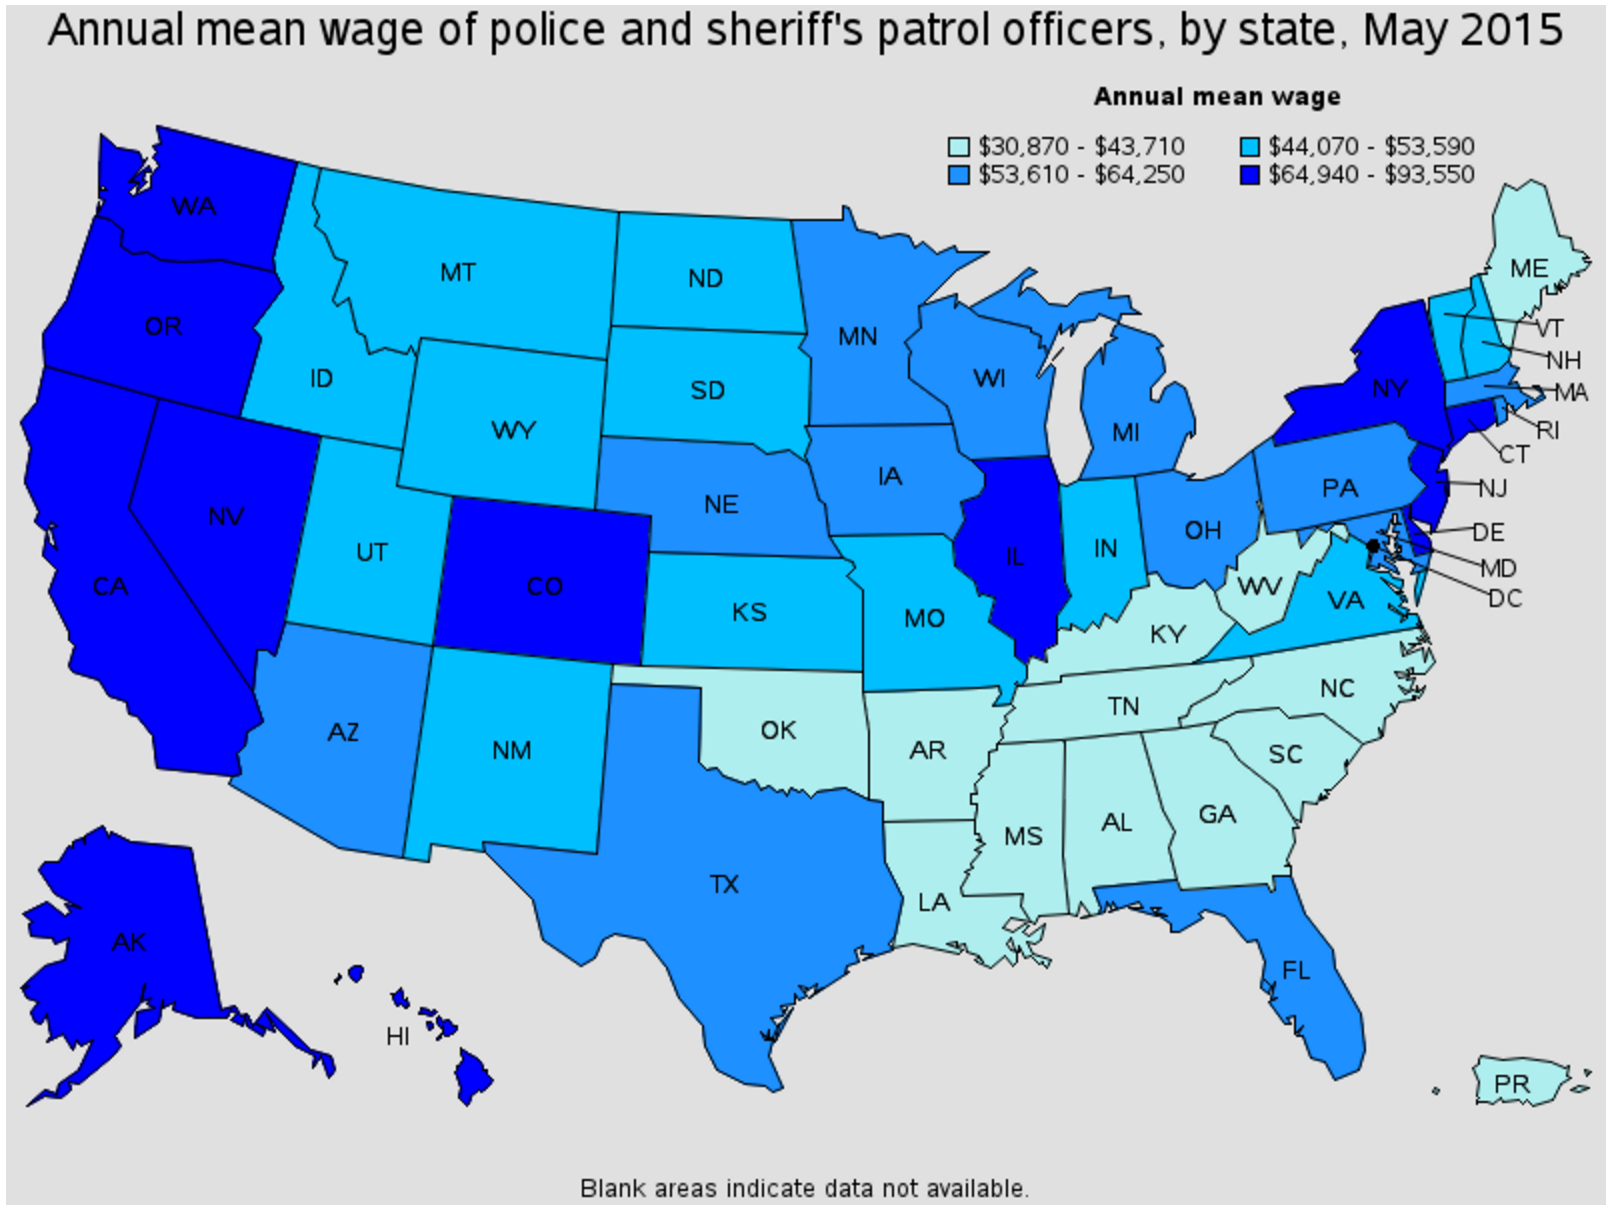 Lennox police officer average salary by state